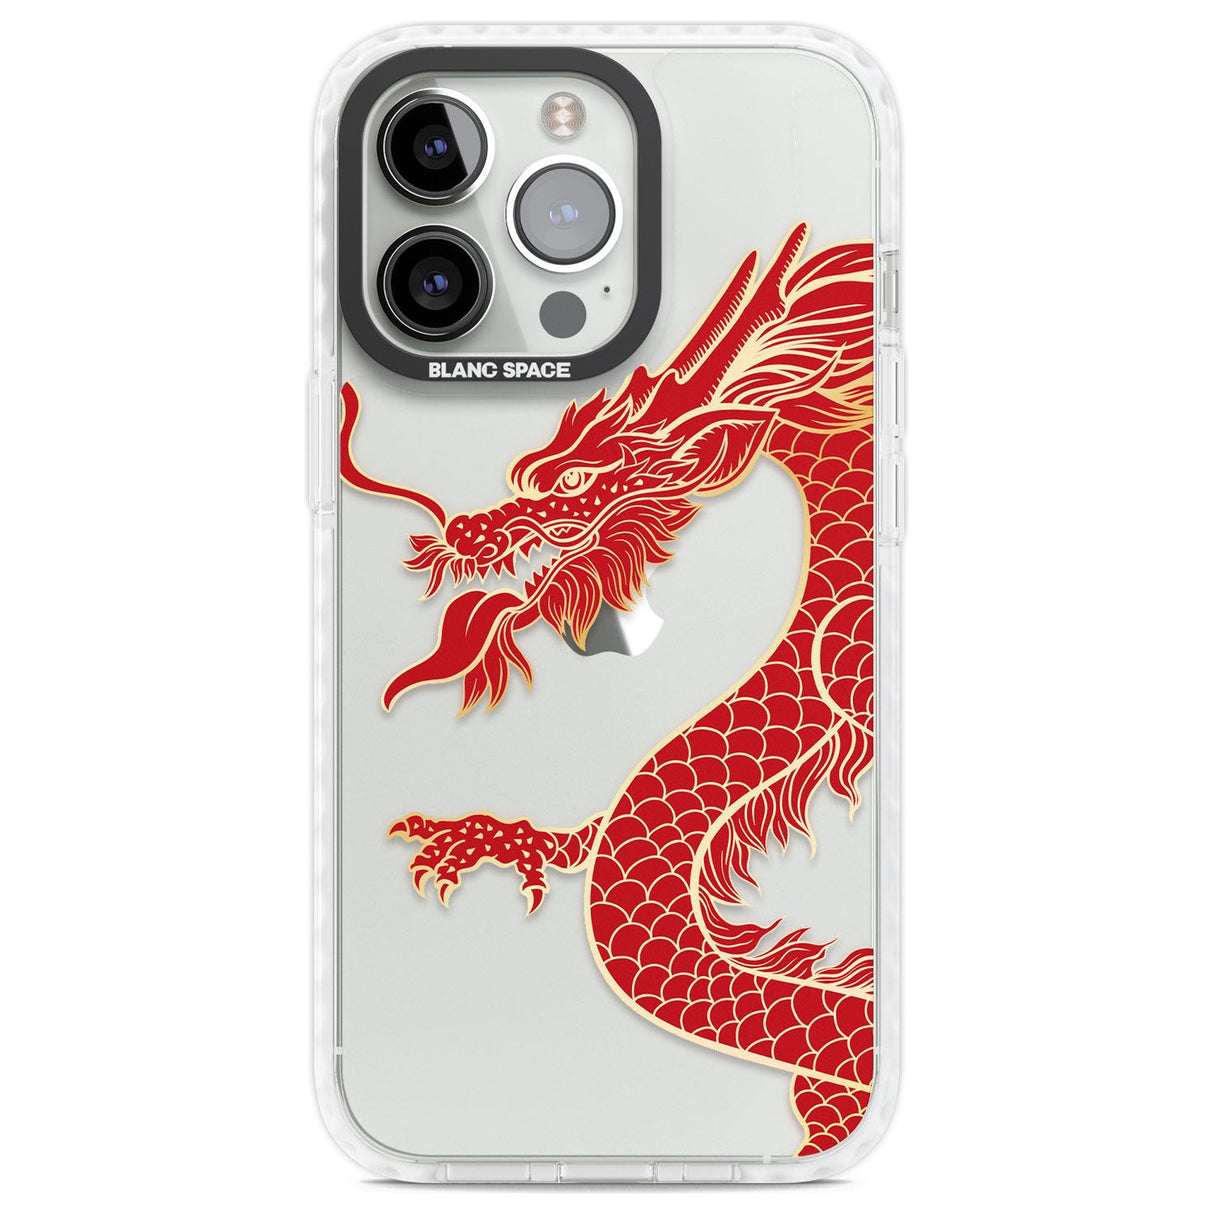 Large Red Dragon Phone Case iPhone 13 Pro / Impact Case,iPhone 14 Pro / Impact Case,iPhone 15 Pro Max / Impact Case,iPhone 15 Pro / Impact Case Blanc Space